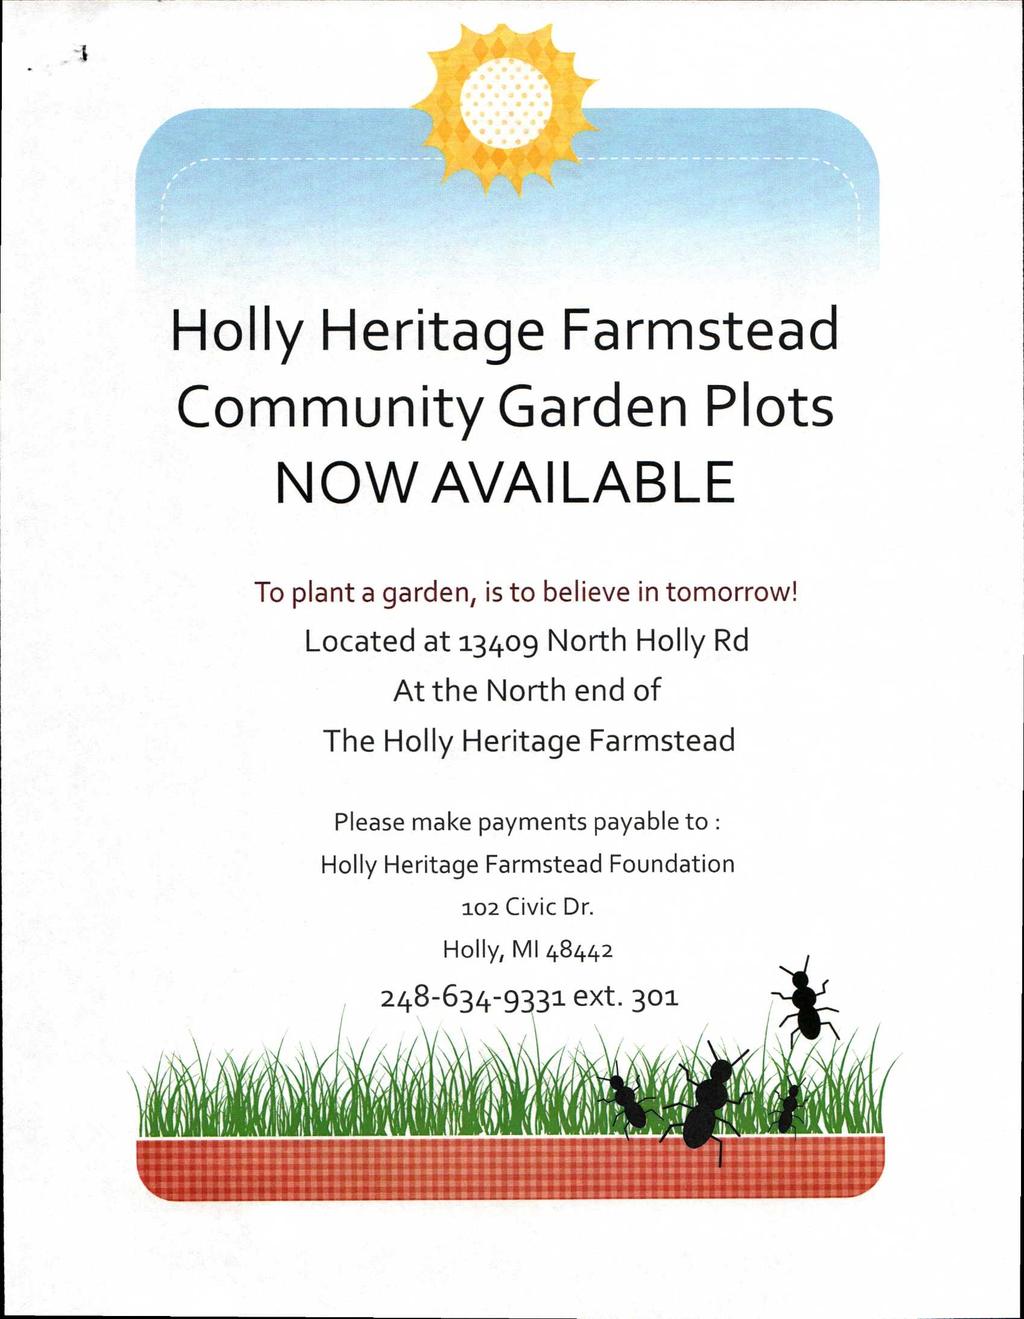 It 9 0 4 4 4 Holly Heritage Farmstead Community Garden Plots NOW AVAILABLE To plant a garden, is to believe in tomorrow!